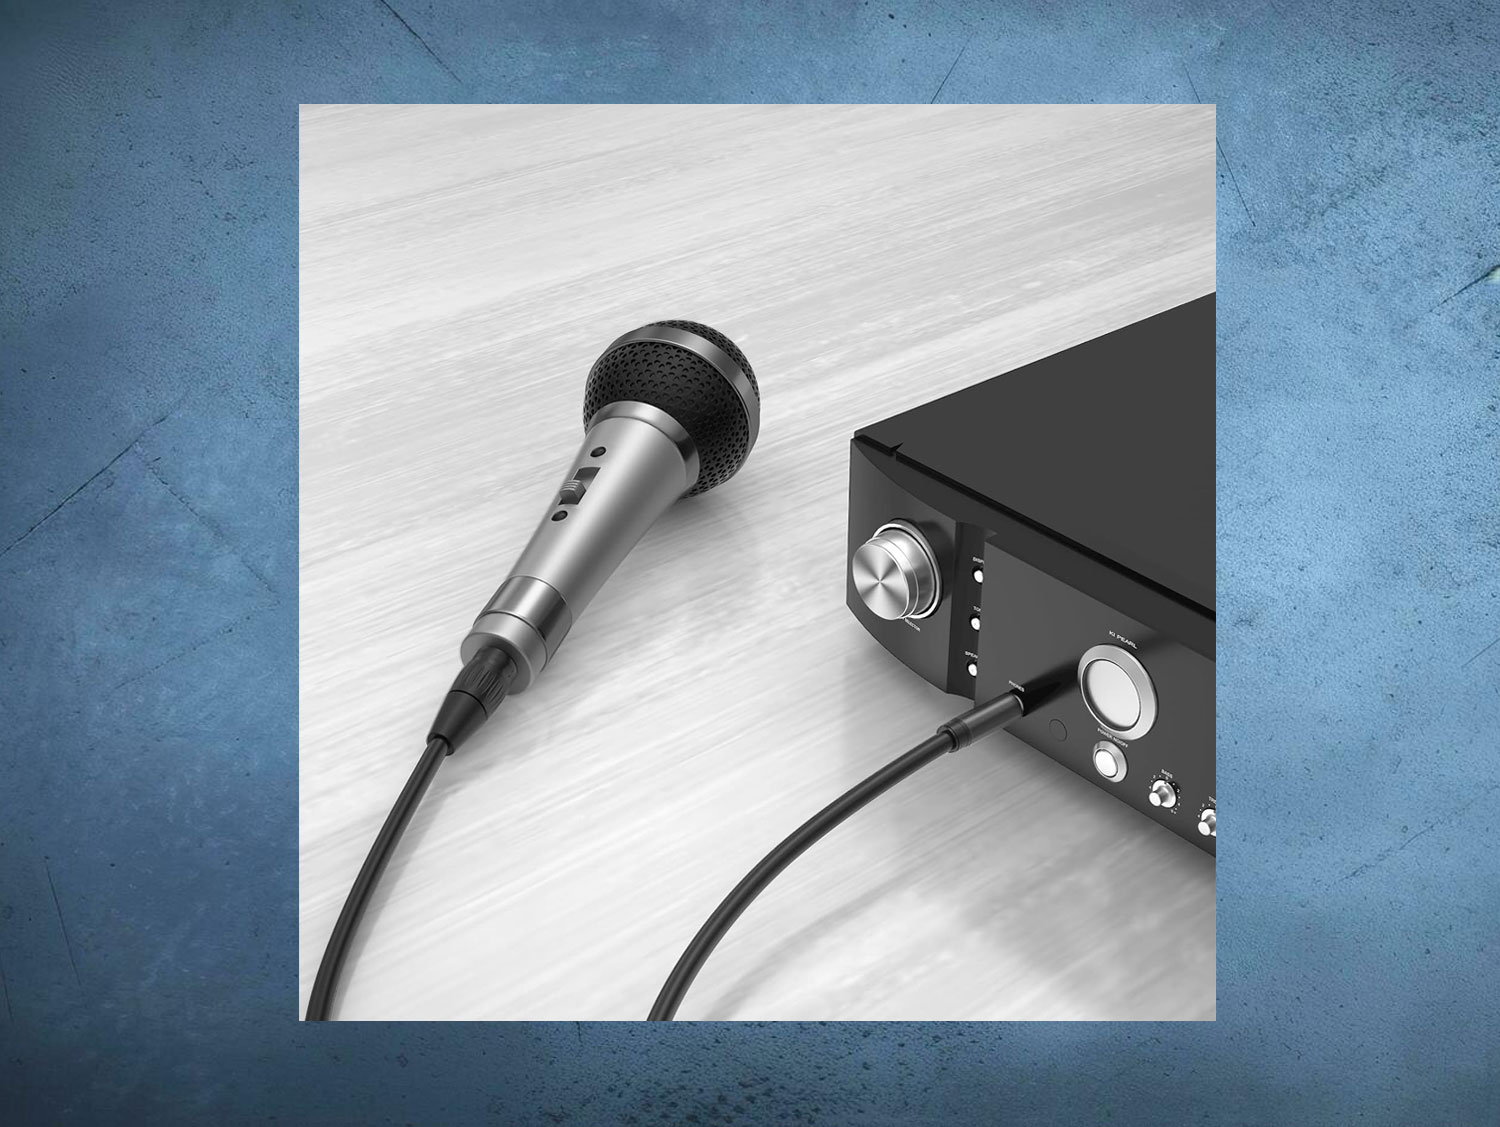 Durable Standard Audio Converter, Ideal for Events